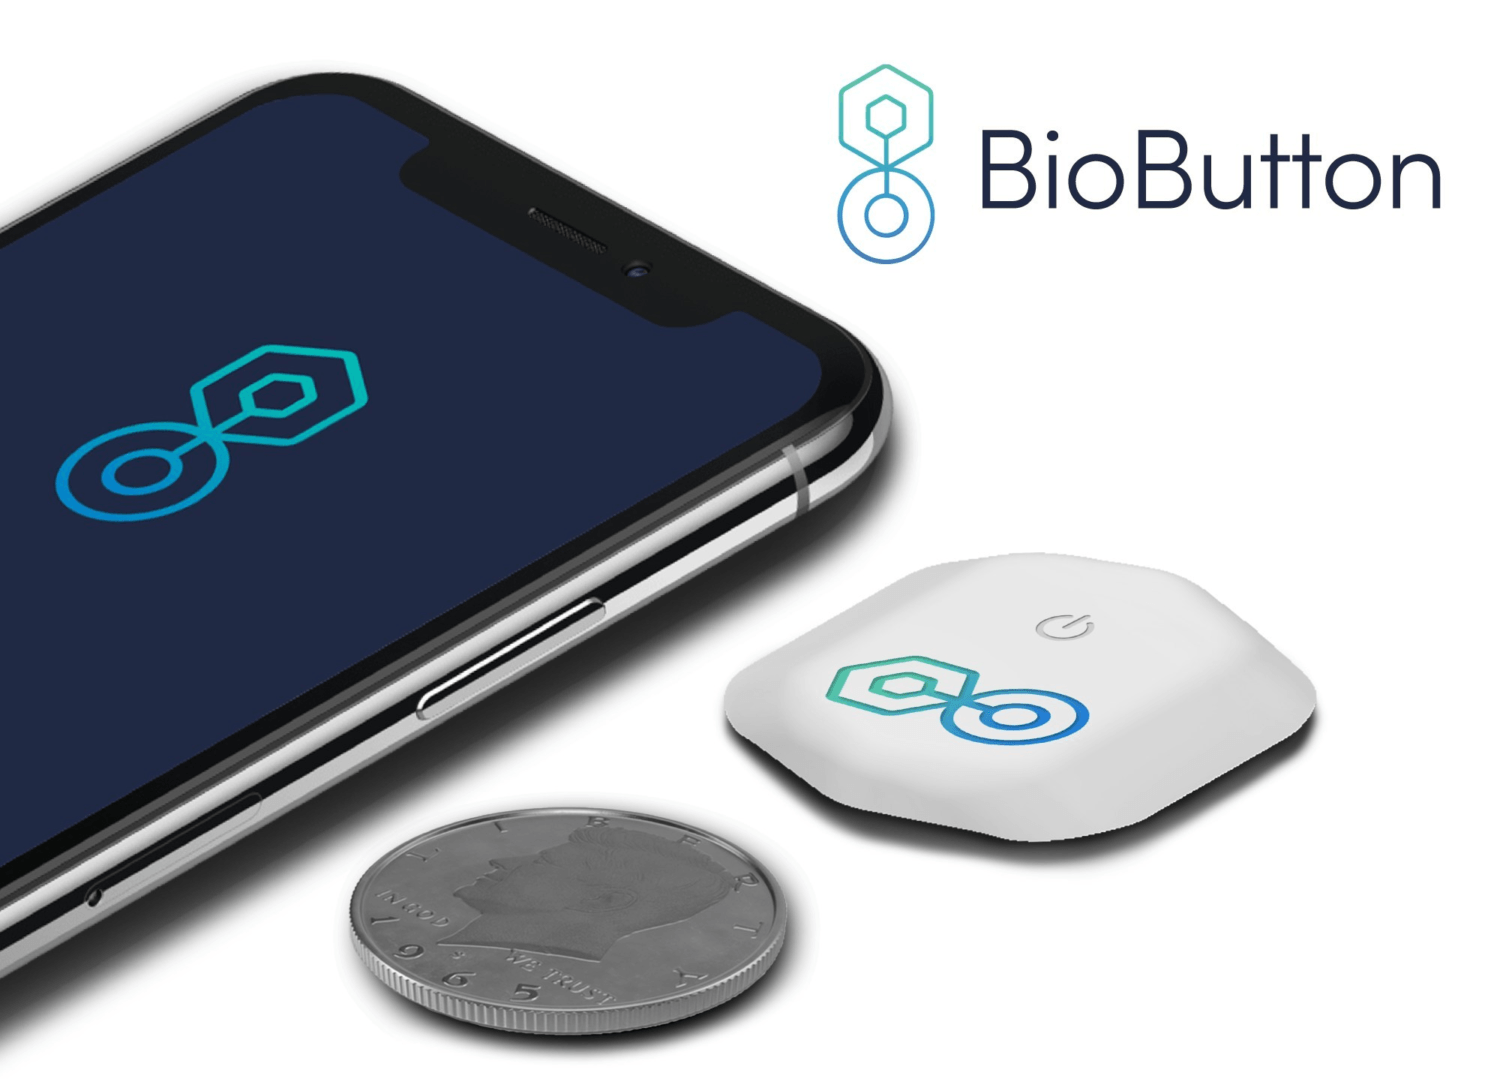 New Coin-Size Disposable Wearable Medical Device Enables COVID-19 Symptom Monitoring